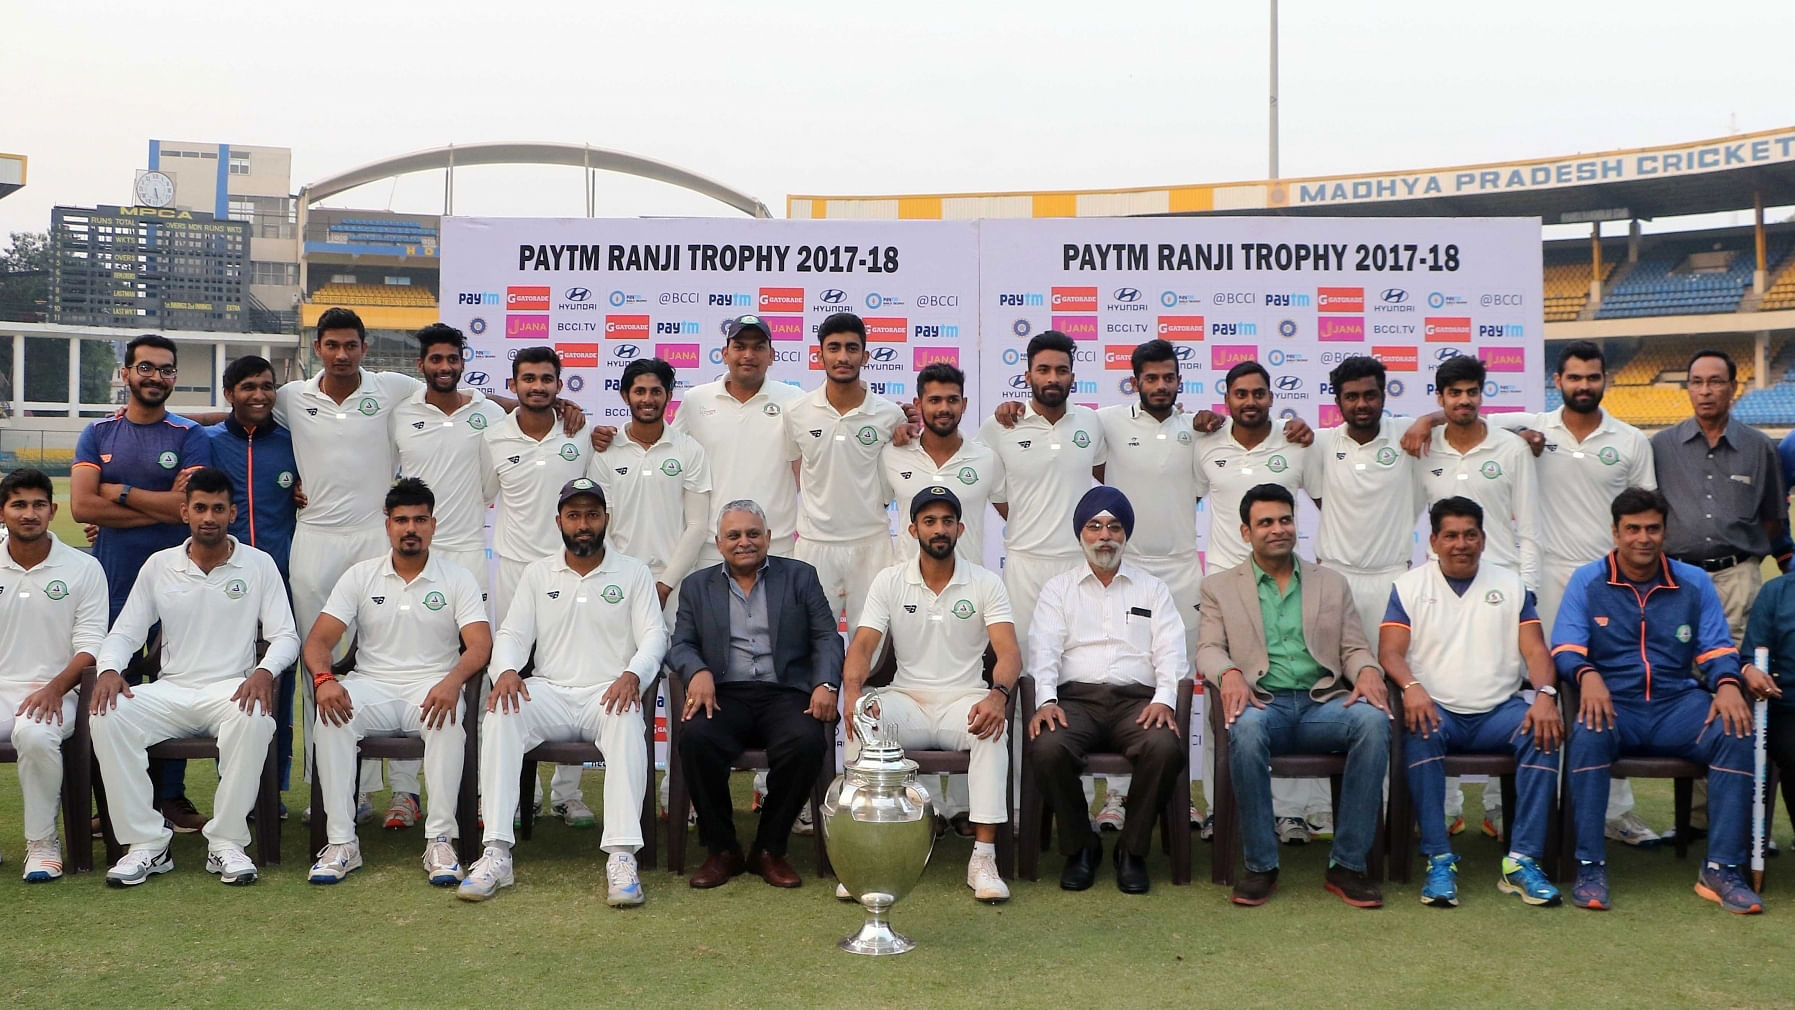 Vidarbha players with the trophy after winning their maiden Ranji Trophy cricket title defeating Delhi by nine wickets in the Ranji Trophy final.&nbsp;